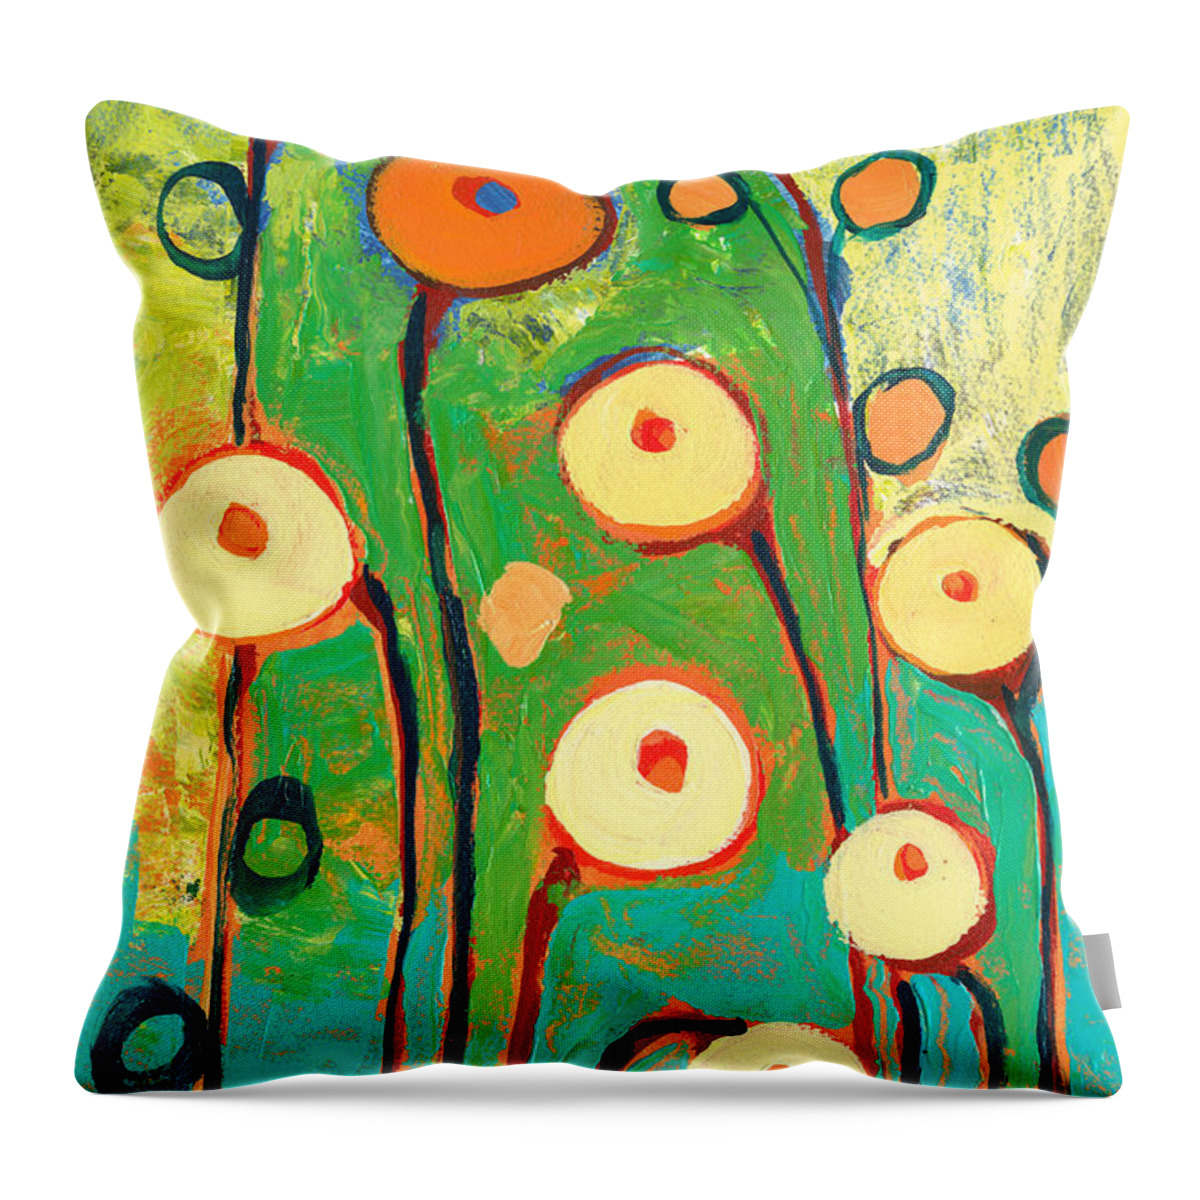 Poppy Throw Pillow featuring the painting Poppy Celebration by Jennifer Lommers